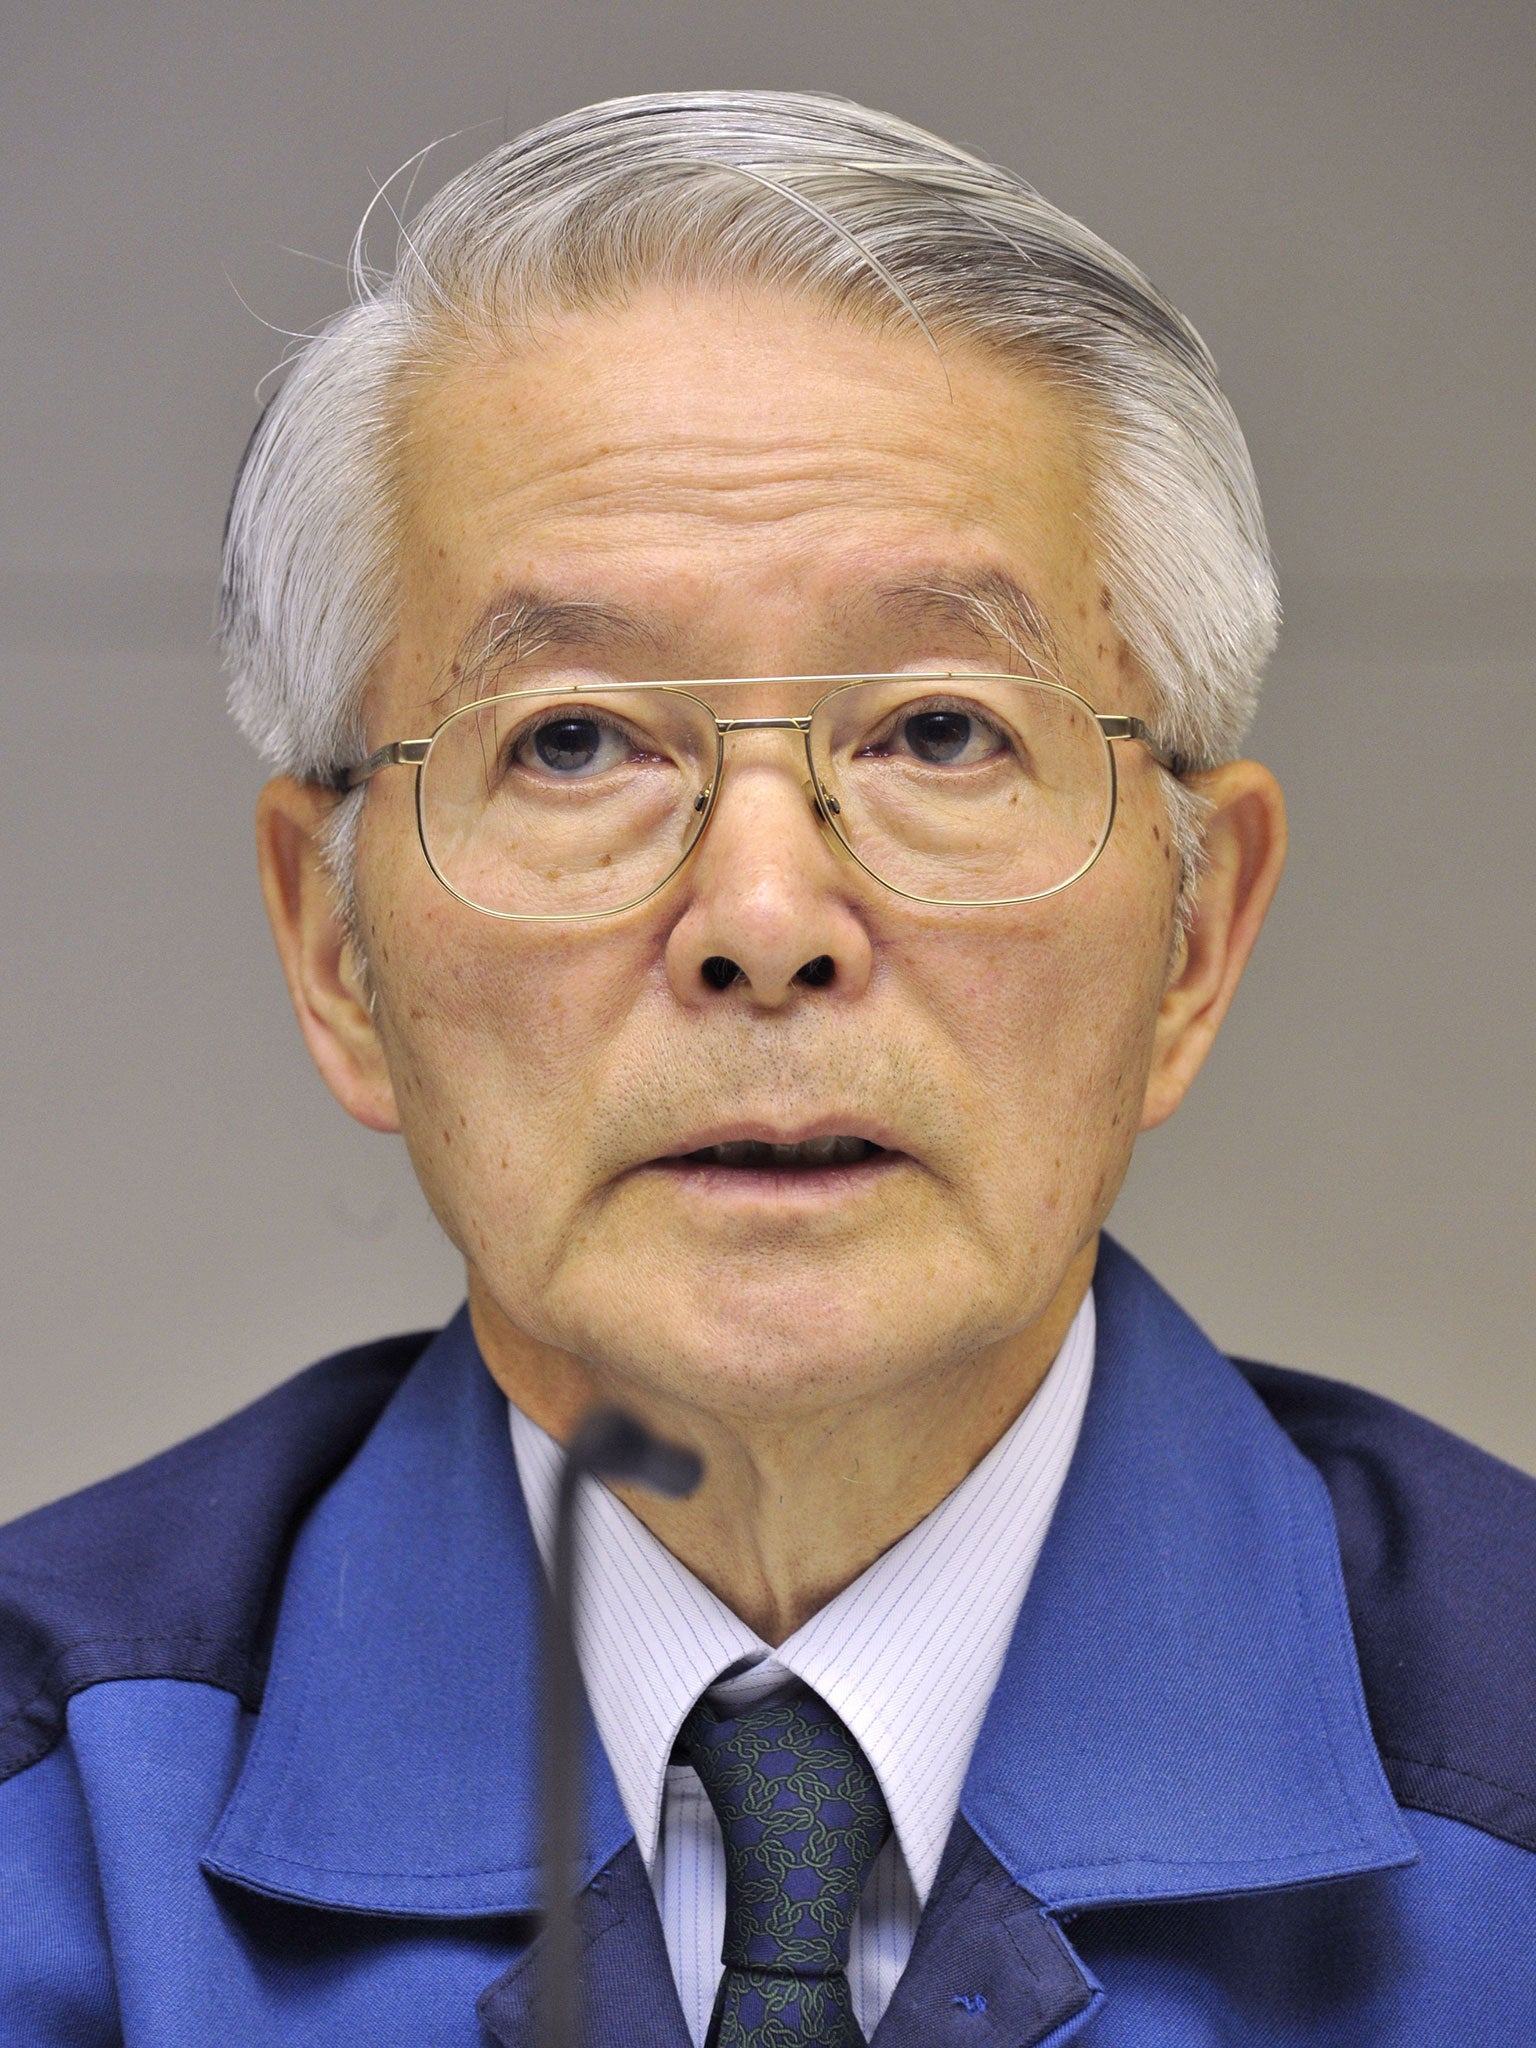 &#13;
Tsunehisa Katsumata, the former chairman of Tepco, is expected to deny the charges &#13;